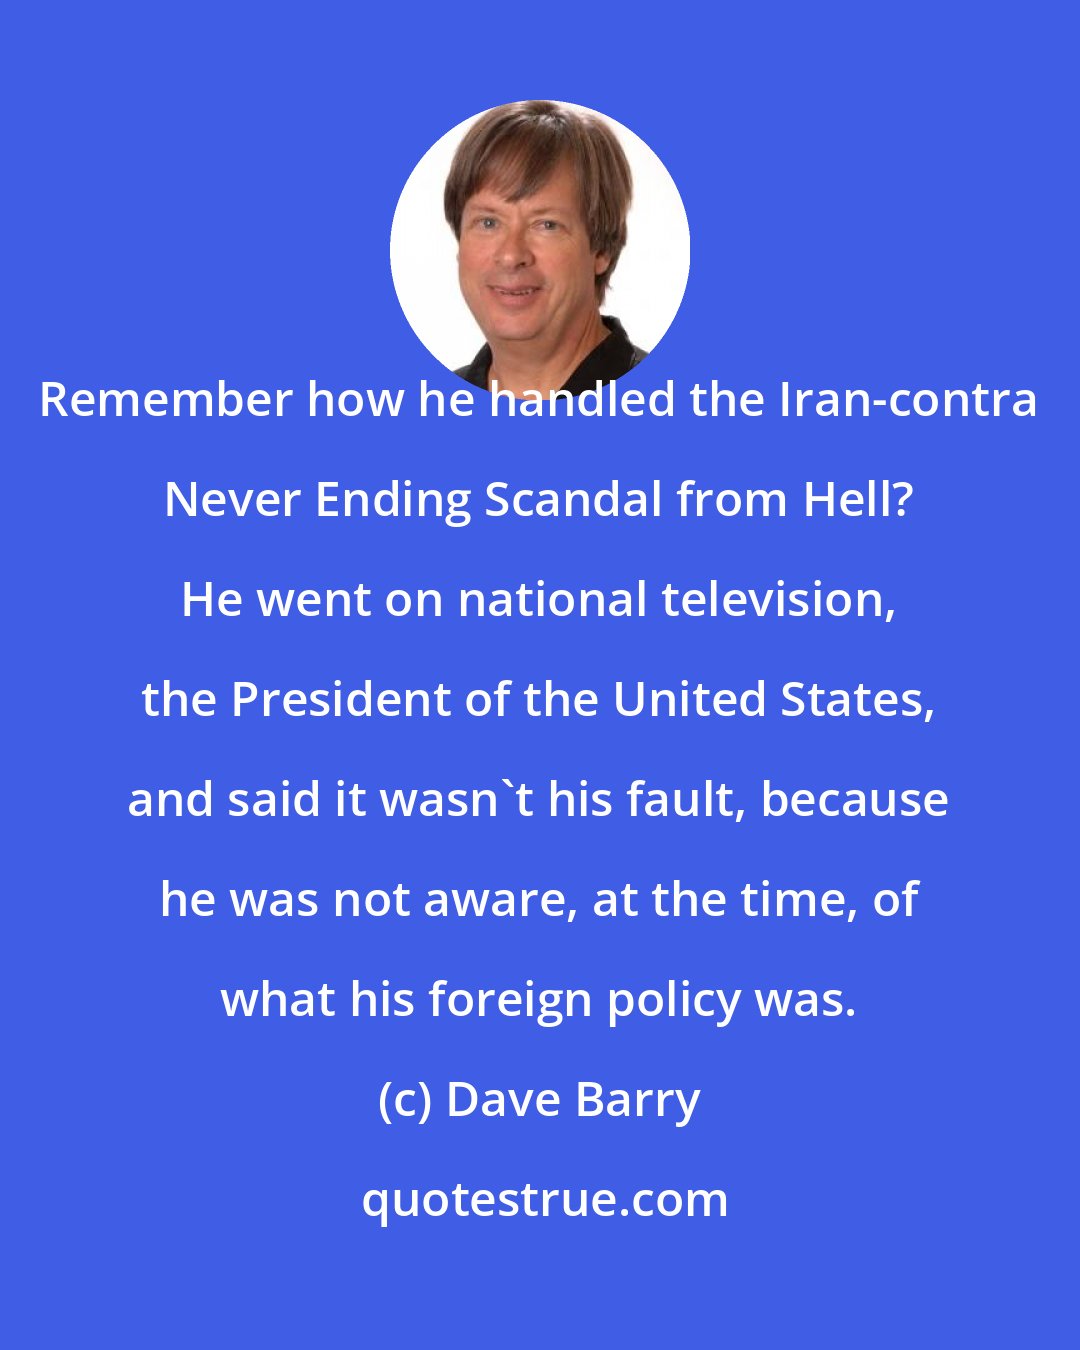 Dave Barry: Remember how he handled the Iran-contra Never Ending Scandal from Hell? He went on national television, the President of the United States, and said it wasn't his fault, because he was not aware, at the time, of what his foreign policy was.